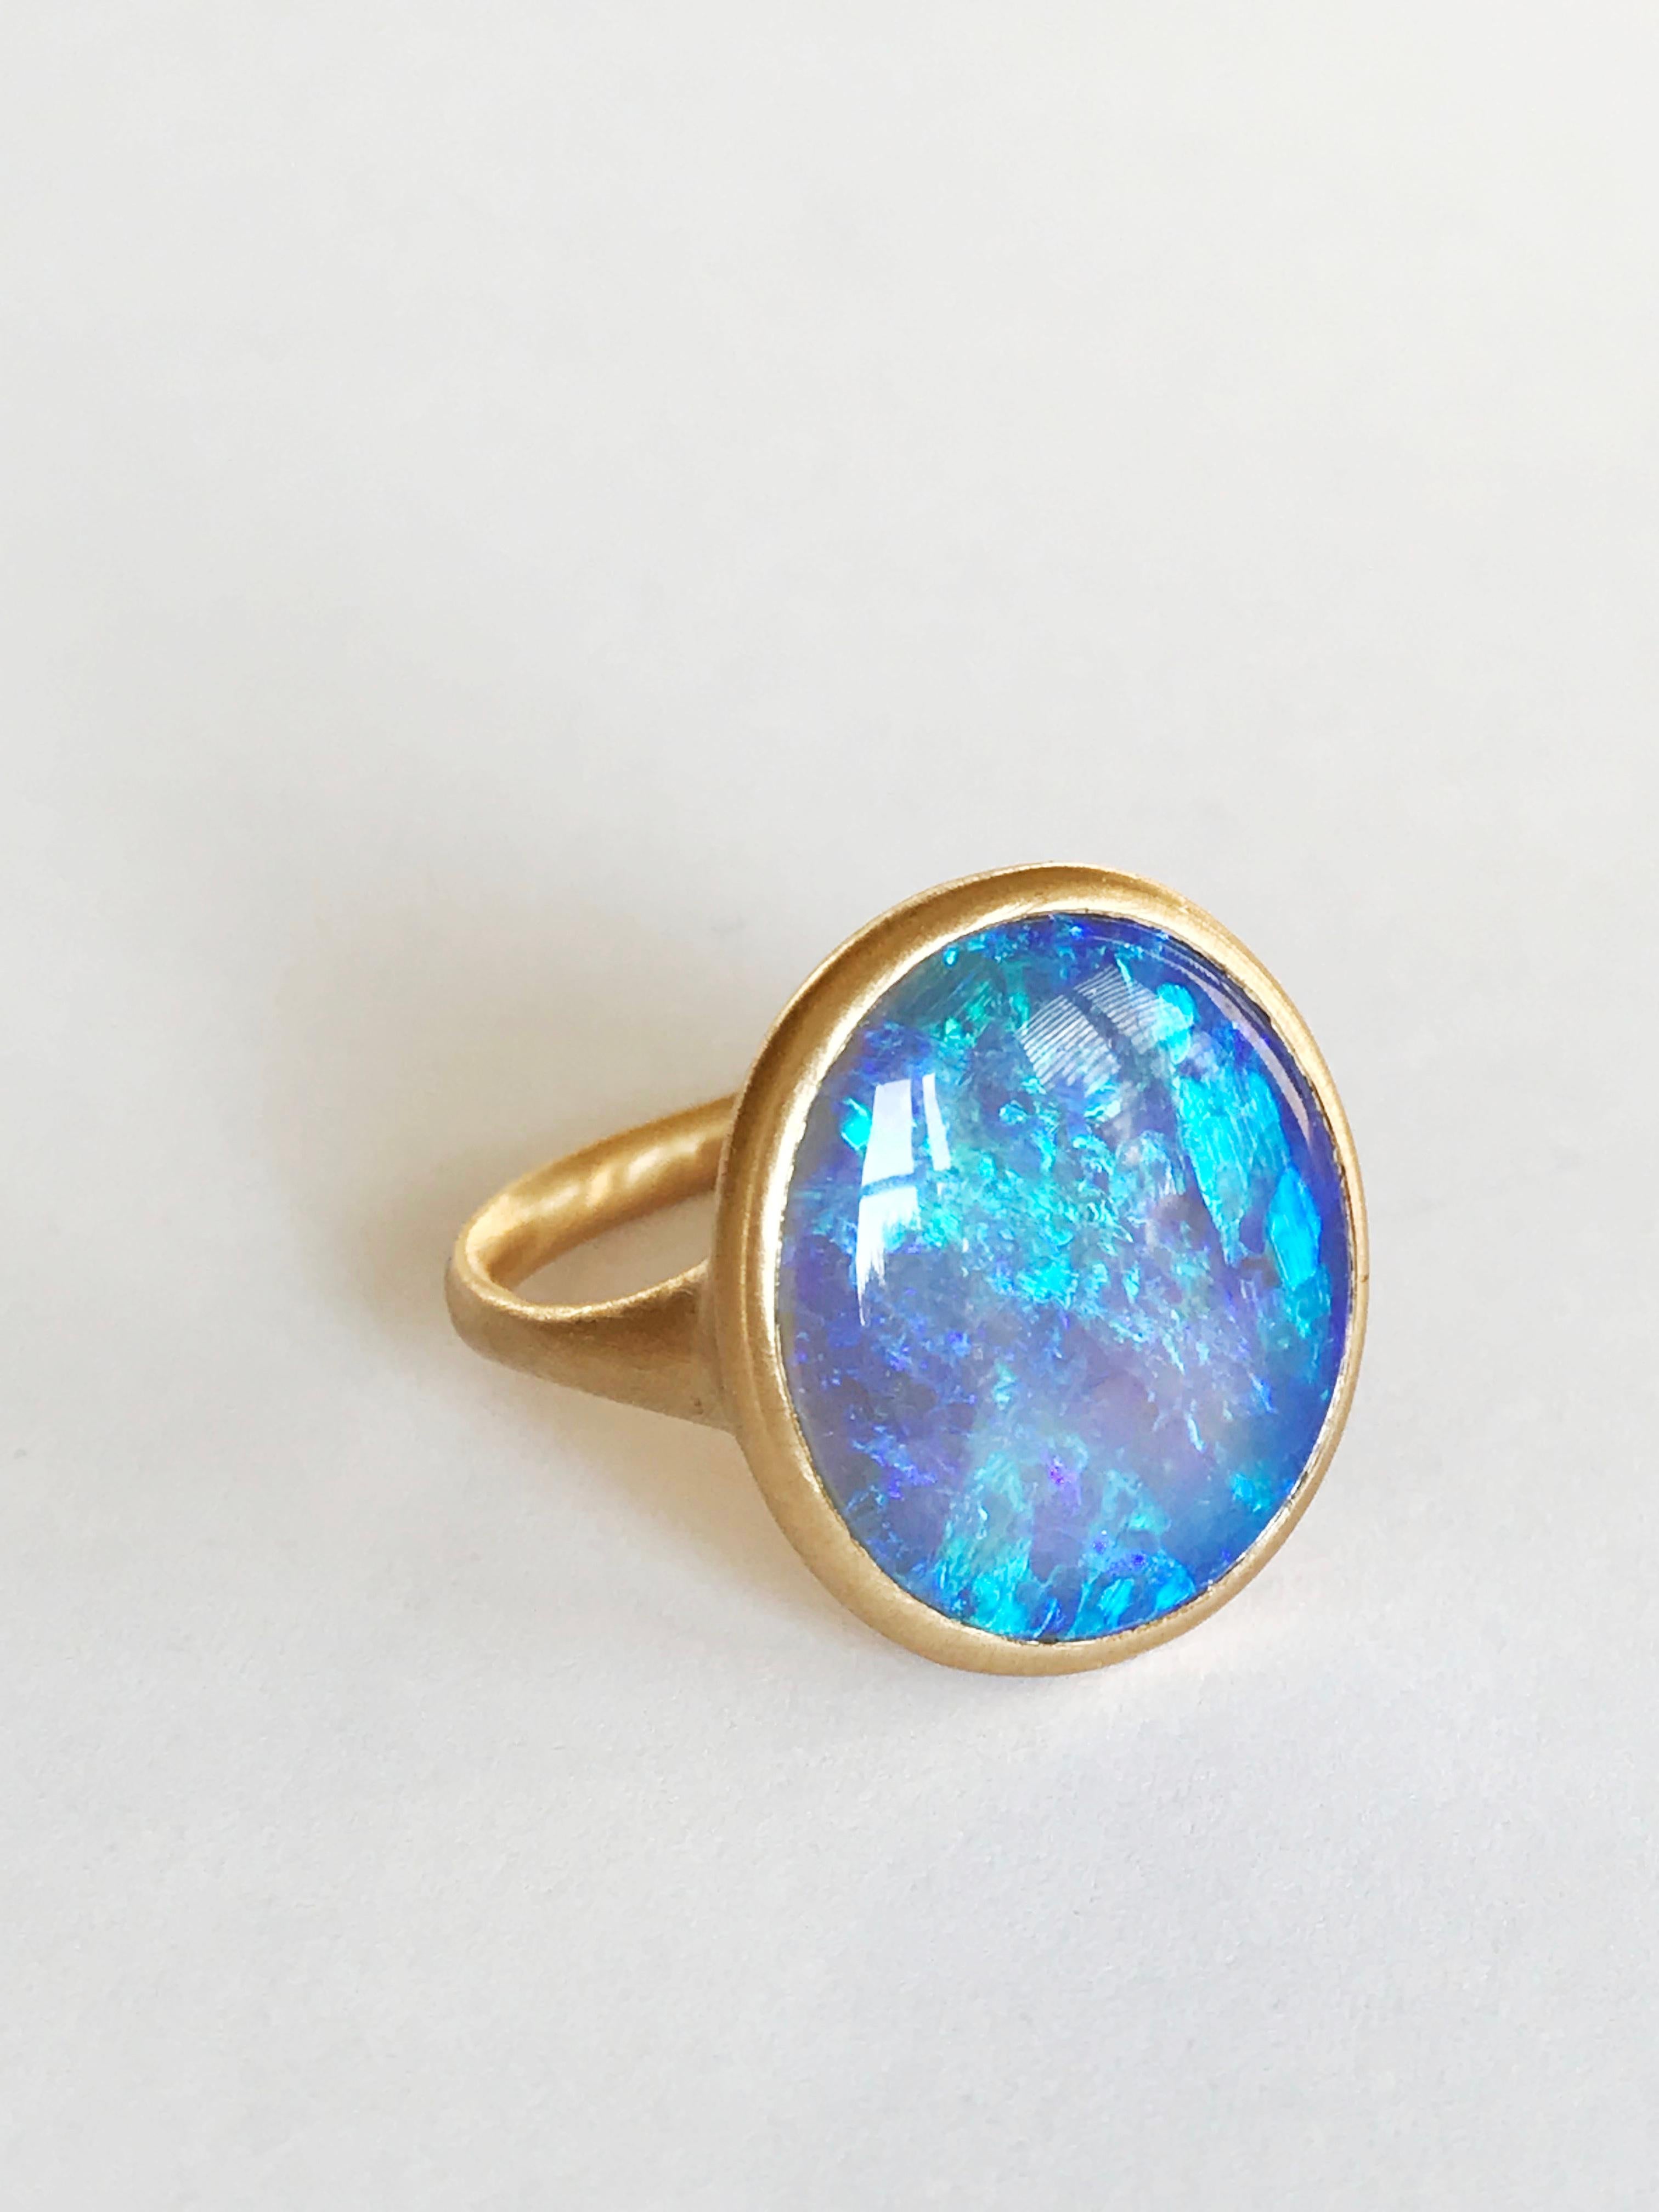 Dalben design One of a kind 18 kt yellow  gold ring with an oval cabochon solid Australian Crystal Opal weight 5,64 carats from Coober Pedy  .
The opal has  wonderful blue green reflex especially at sunshine 
Ring size  US 7 1/4   -  EU 55